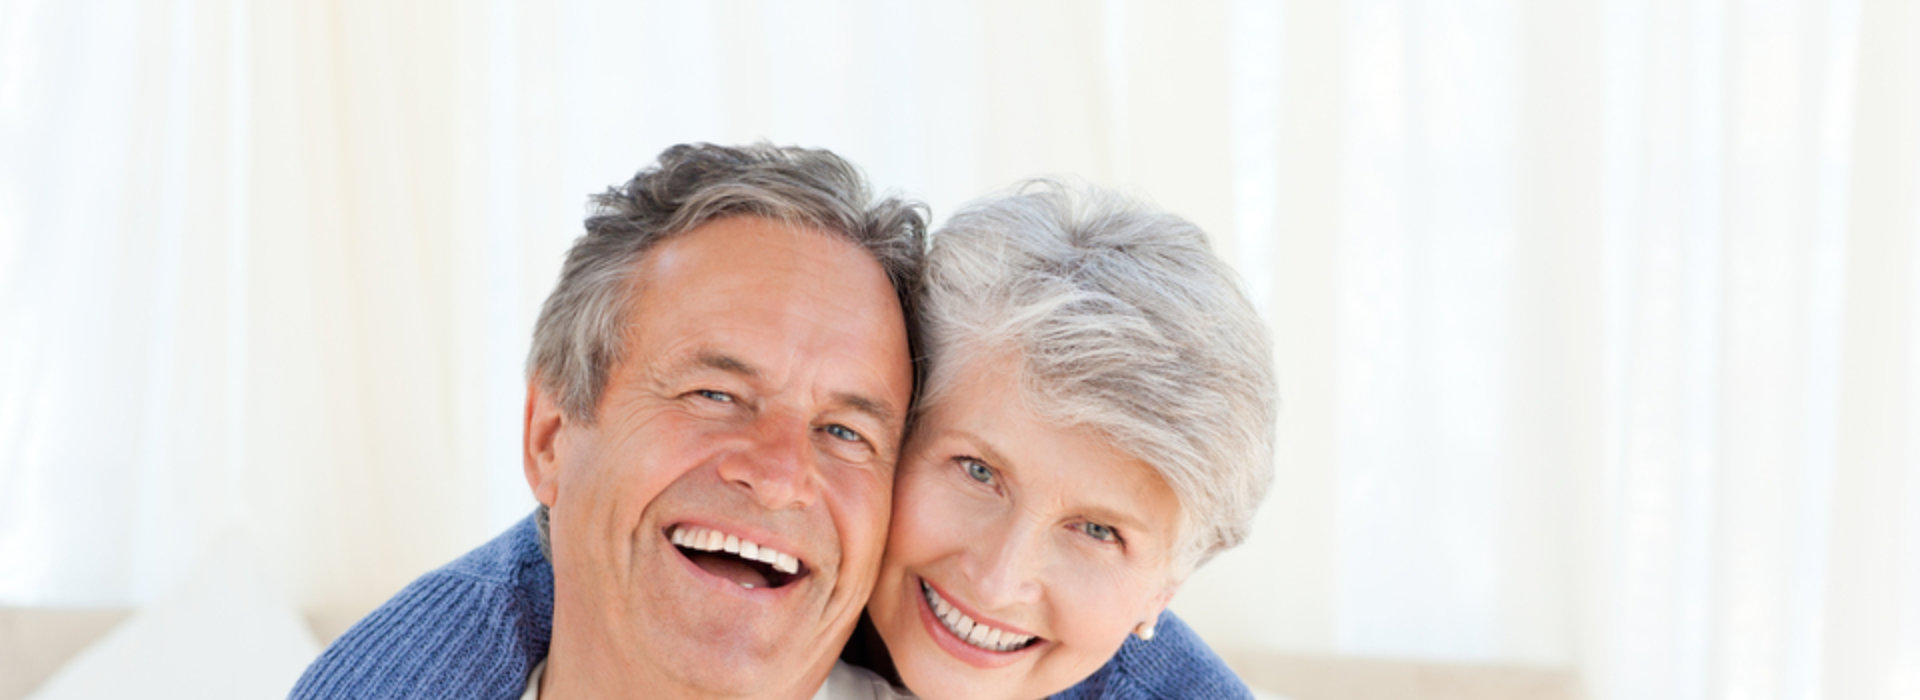 A senior couple is smiling while wearing dentures.